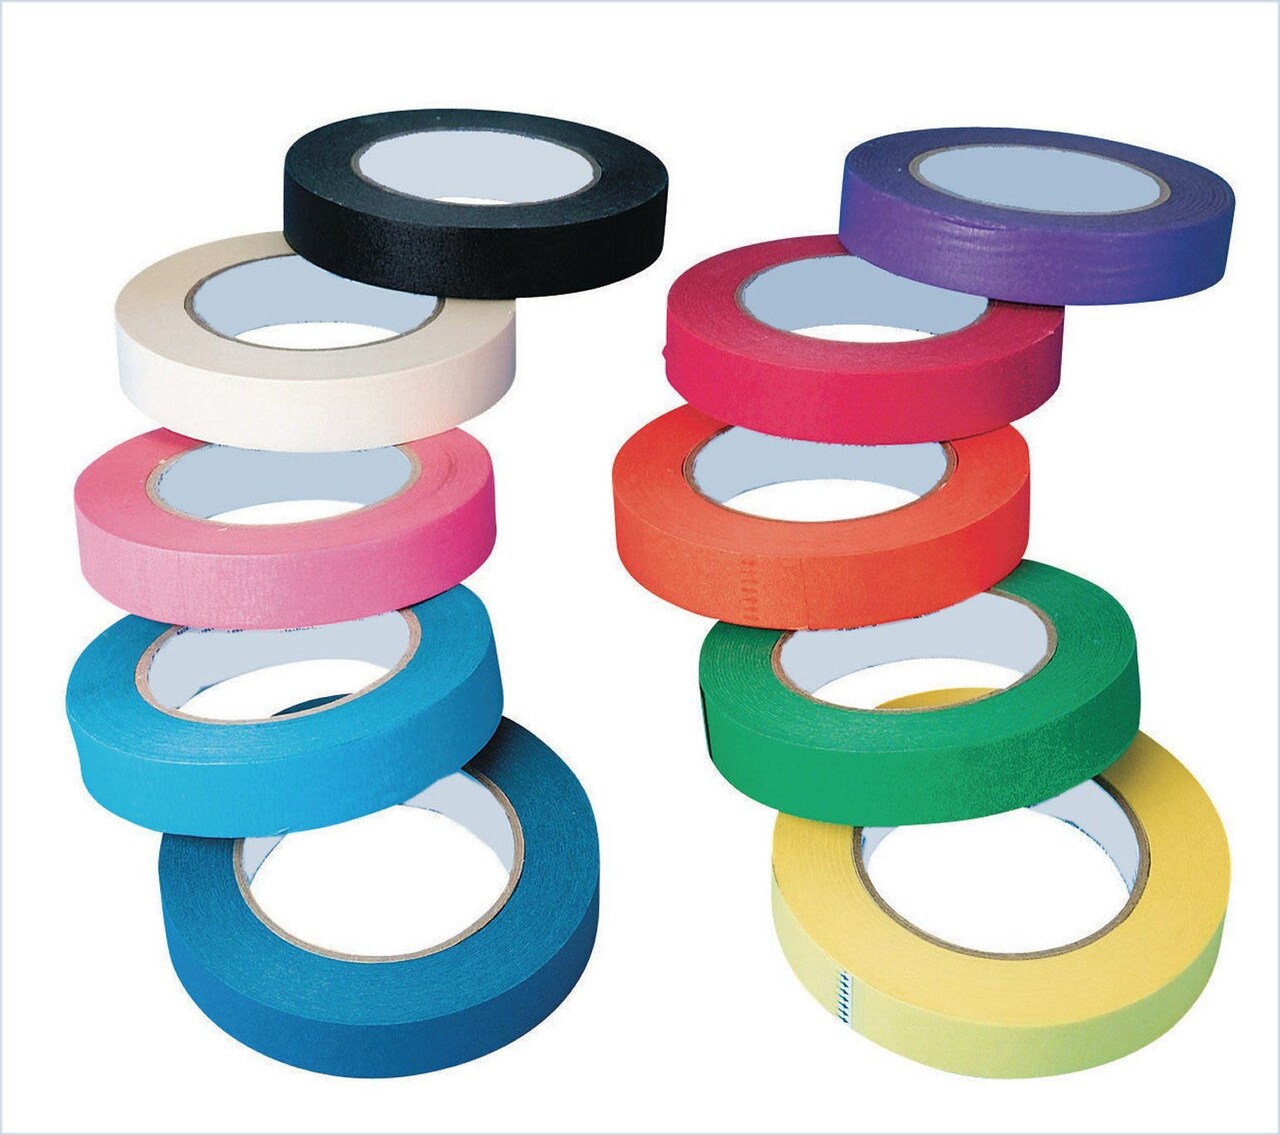 10-Color Craft Tape Assortment, 1W x 60 yards